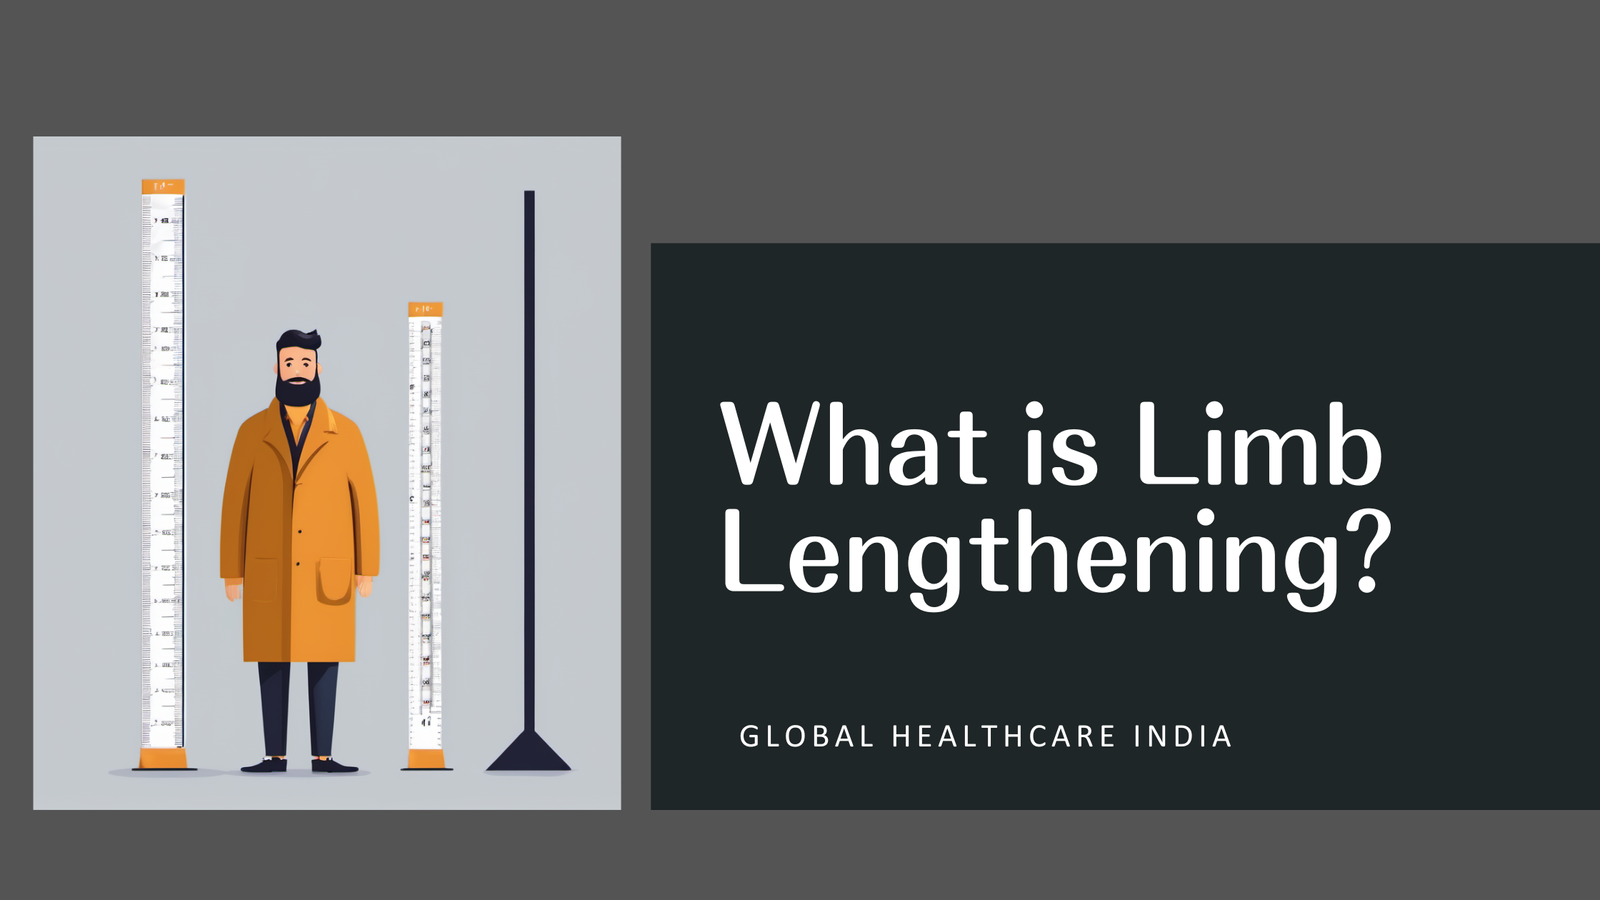 What is limb lengthening